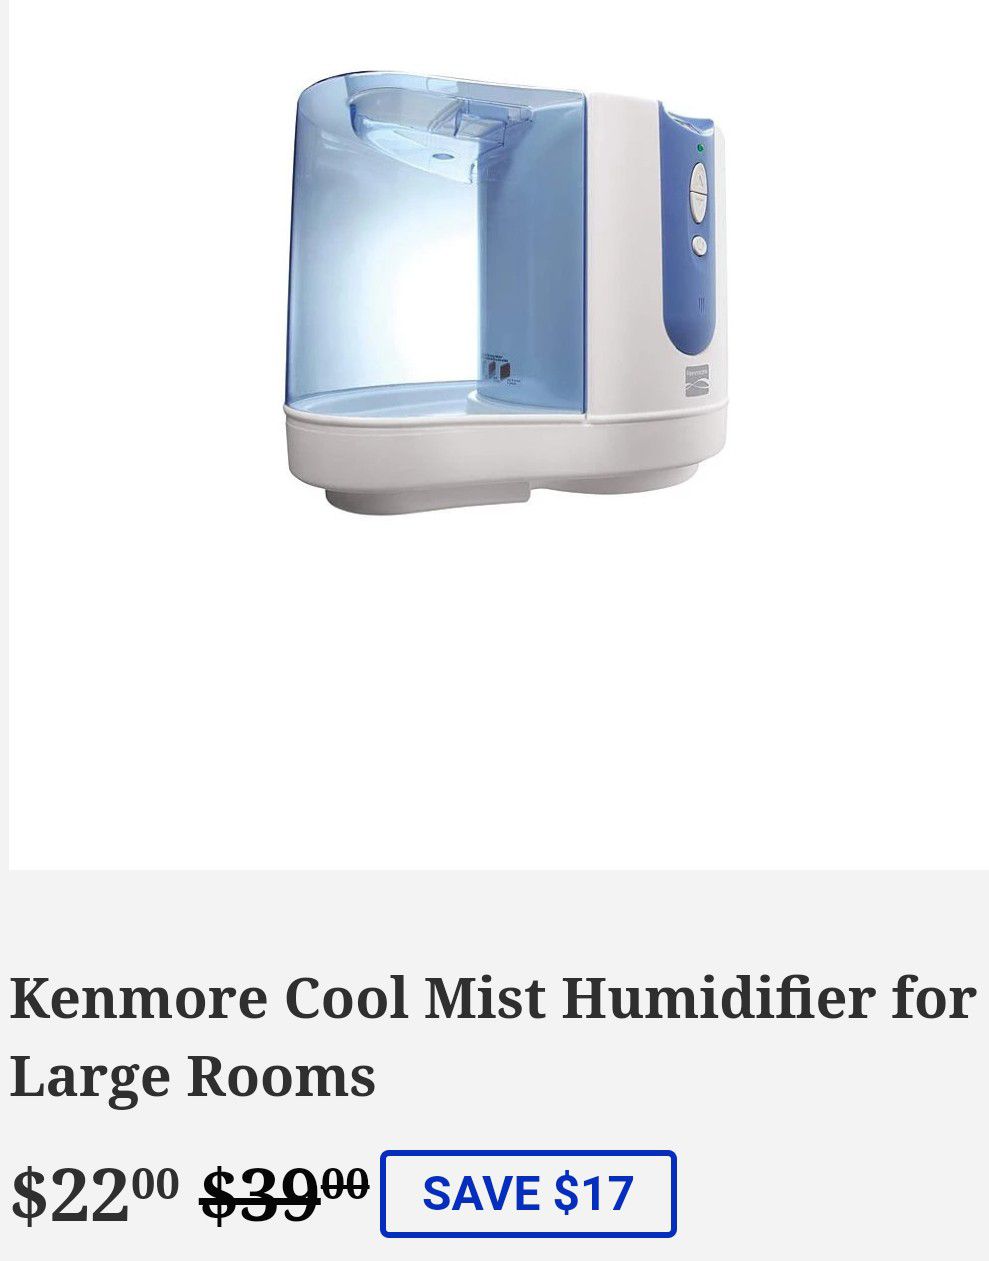 Kenmore Cool Mist Humidifier for Large Rooms